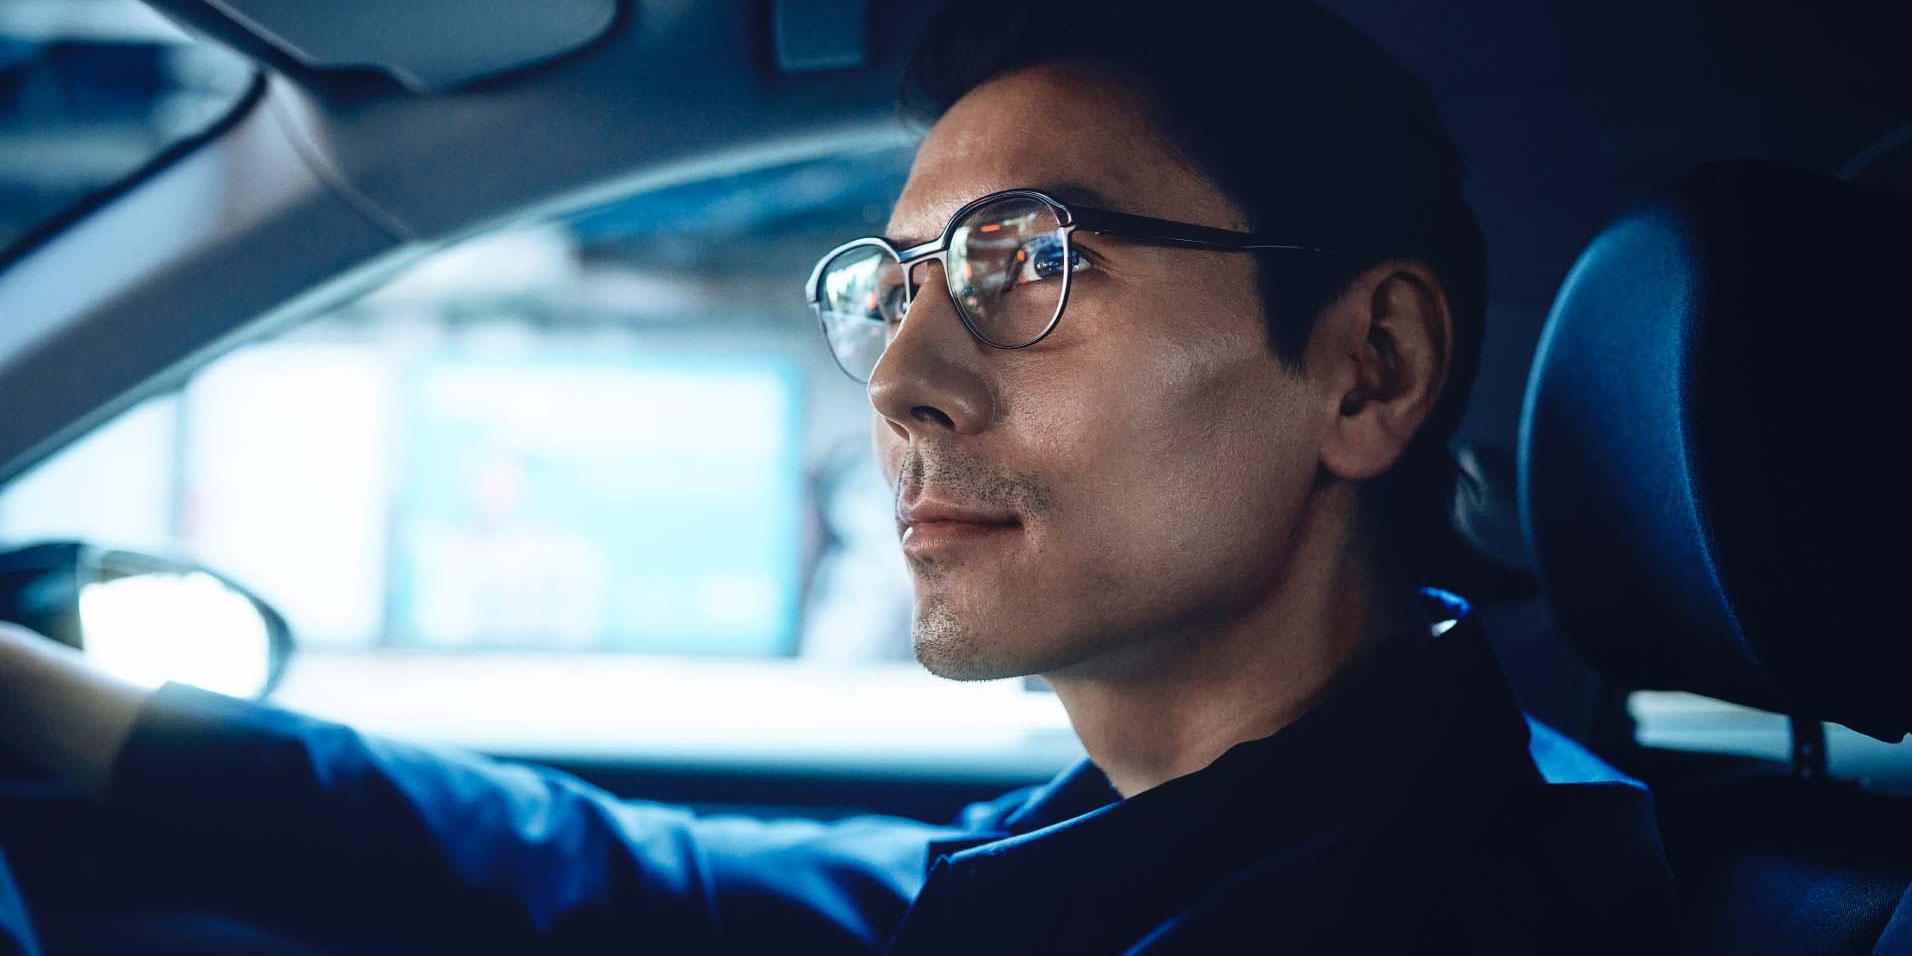 https://www.zeiss.es/content/dam/vis-b2c/reference-master/images/better-vision/driving-mobility/the-best-glasses-for-driving/lenses-for-driving_header-article.jpg/_jcr_content/renditions/original.image_file.1912.956.0,0,1912,956.file/lenses-for-driving_header-article.jpg